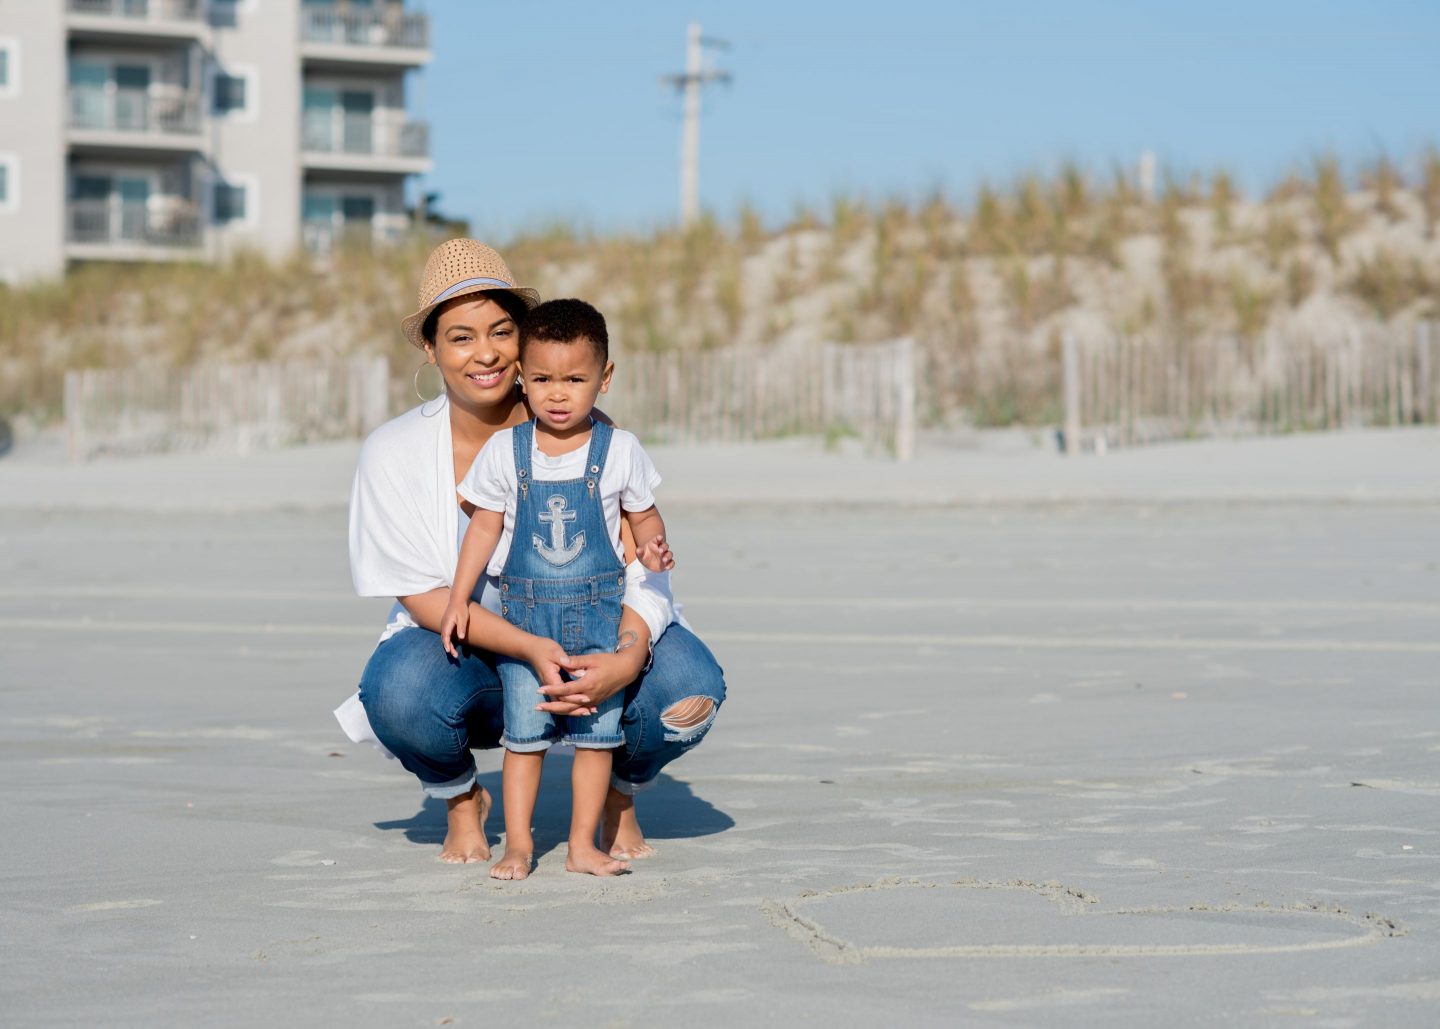 Beach Family Photos: How To Make the Most of Your Beach Photo Shoot